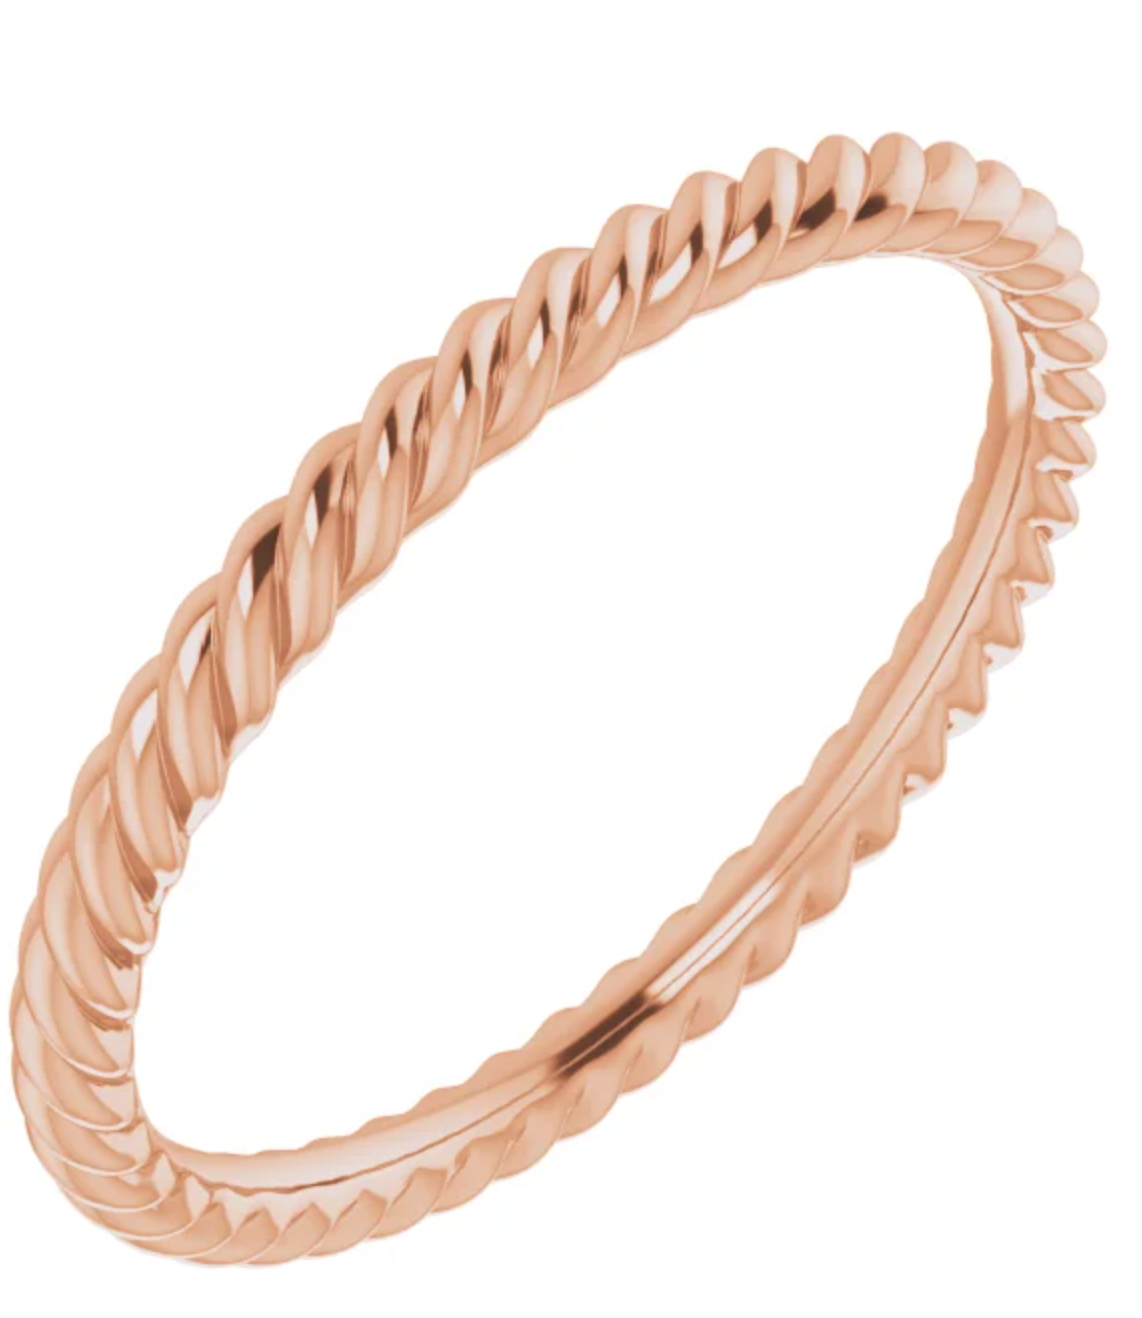 2mm Gold Skinny Rope Band